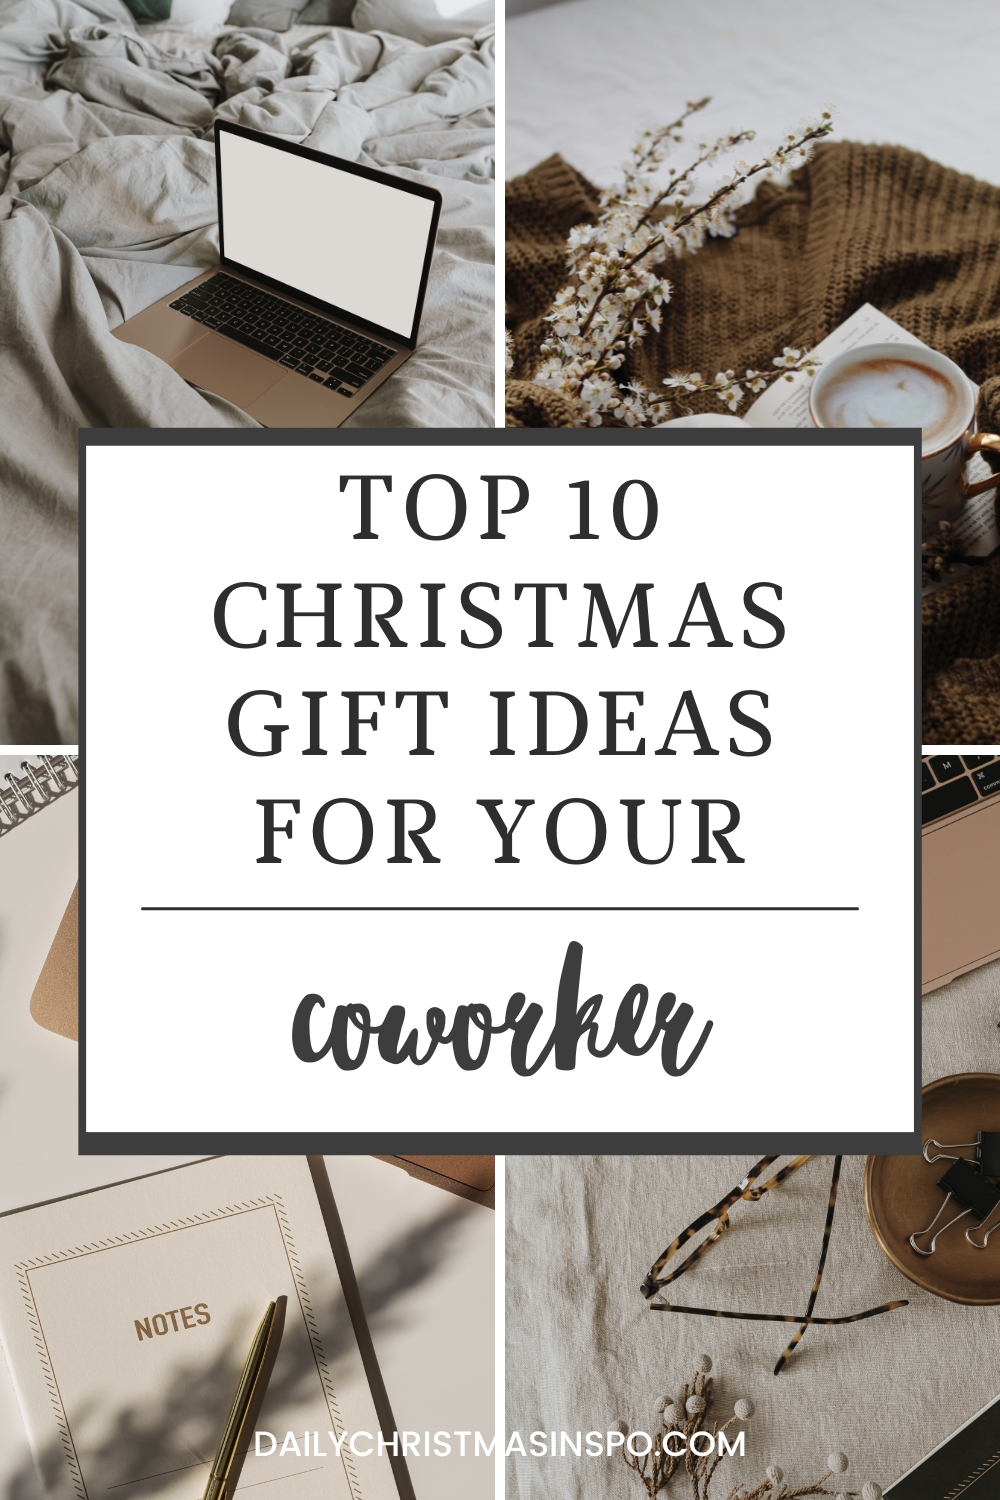 https://dailychristmasinspo.com/wp-content/uploads/2023/05/1-Aesthetic-Theme-10-Best-Gift-Ideas-for-Coworkers.jpg